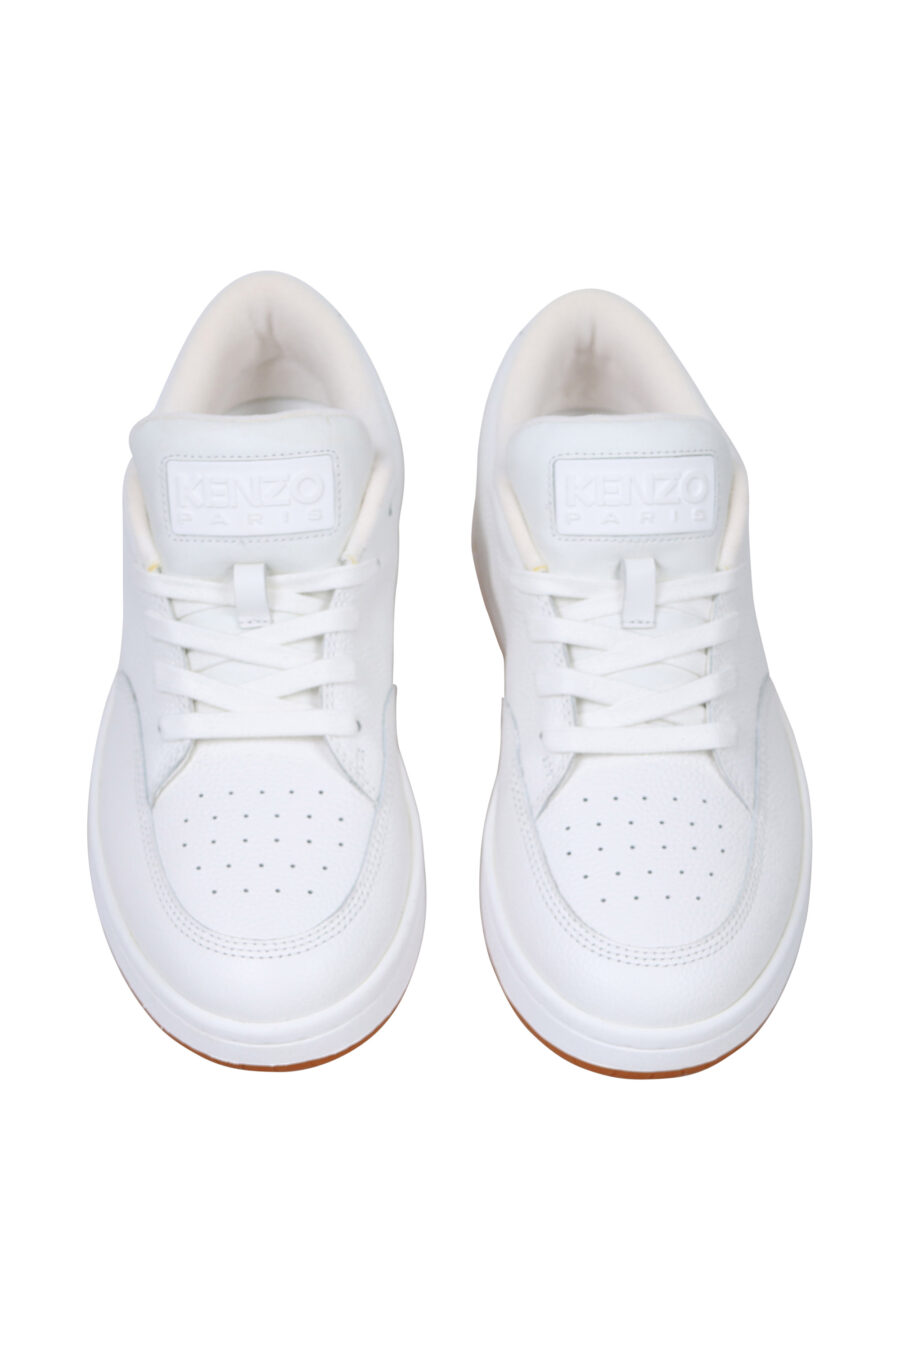 White trainers "kenzo dome" with minilogo and brown sole - 3612230556089 4